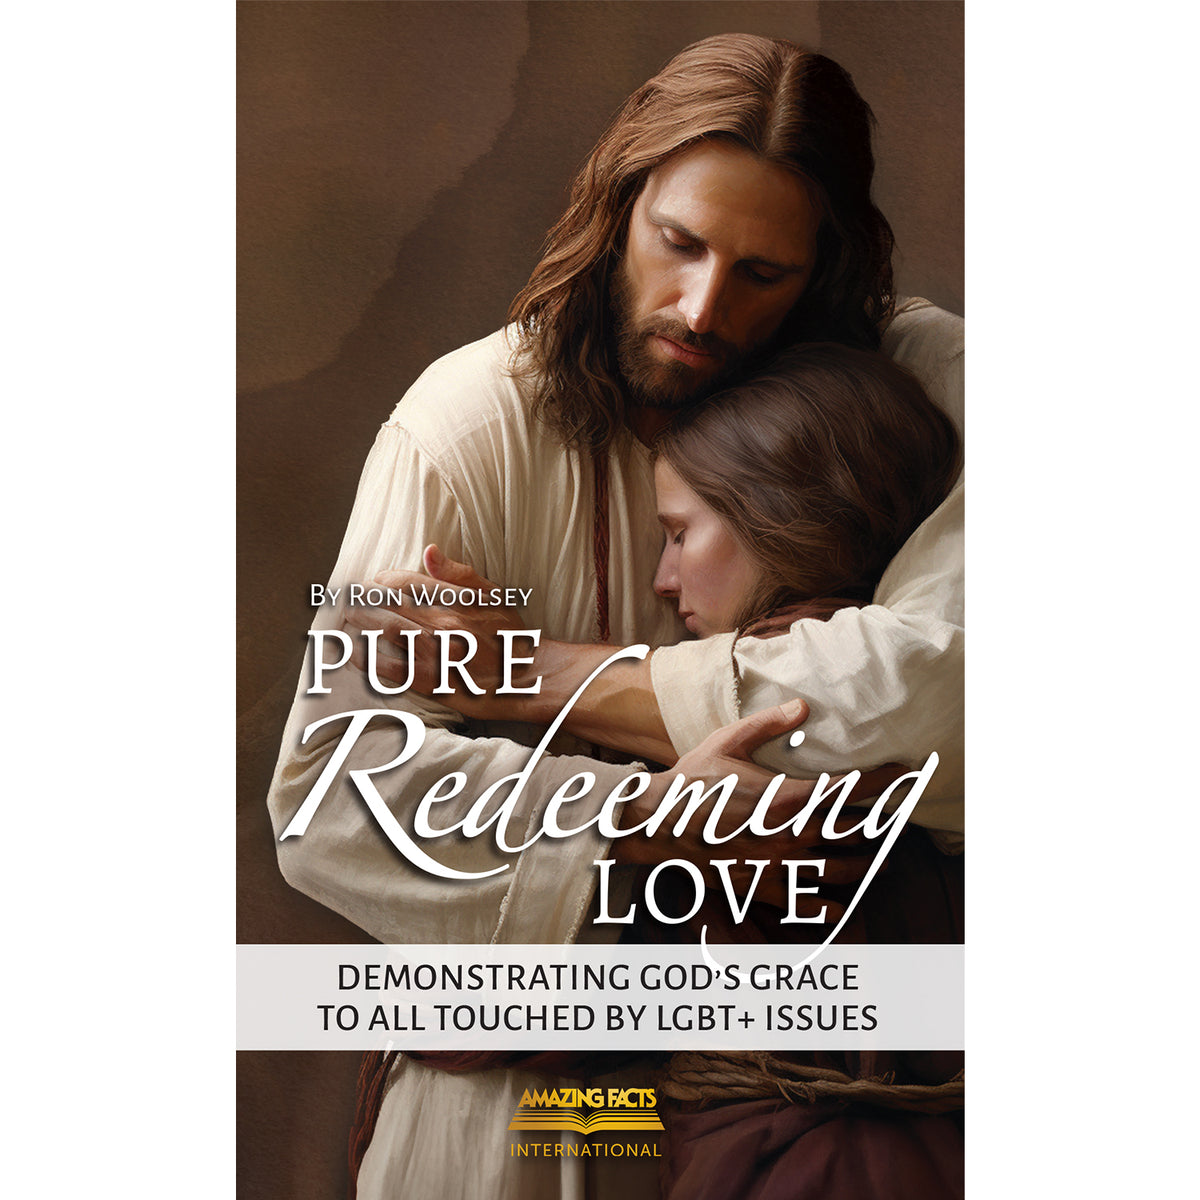 Pure Redeeming Love by Ron Woolsey